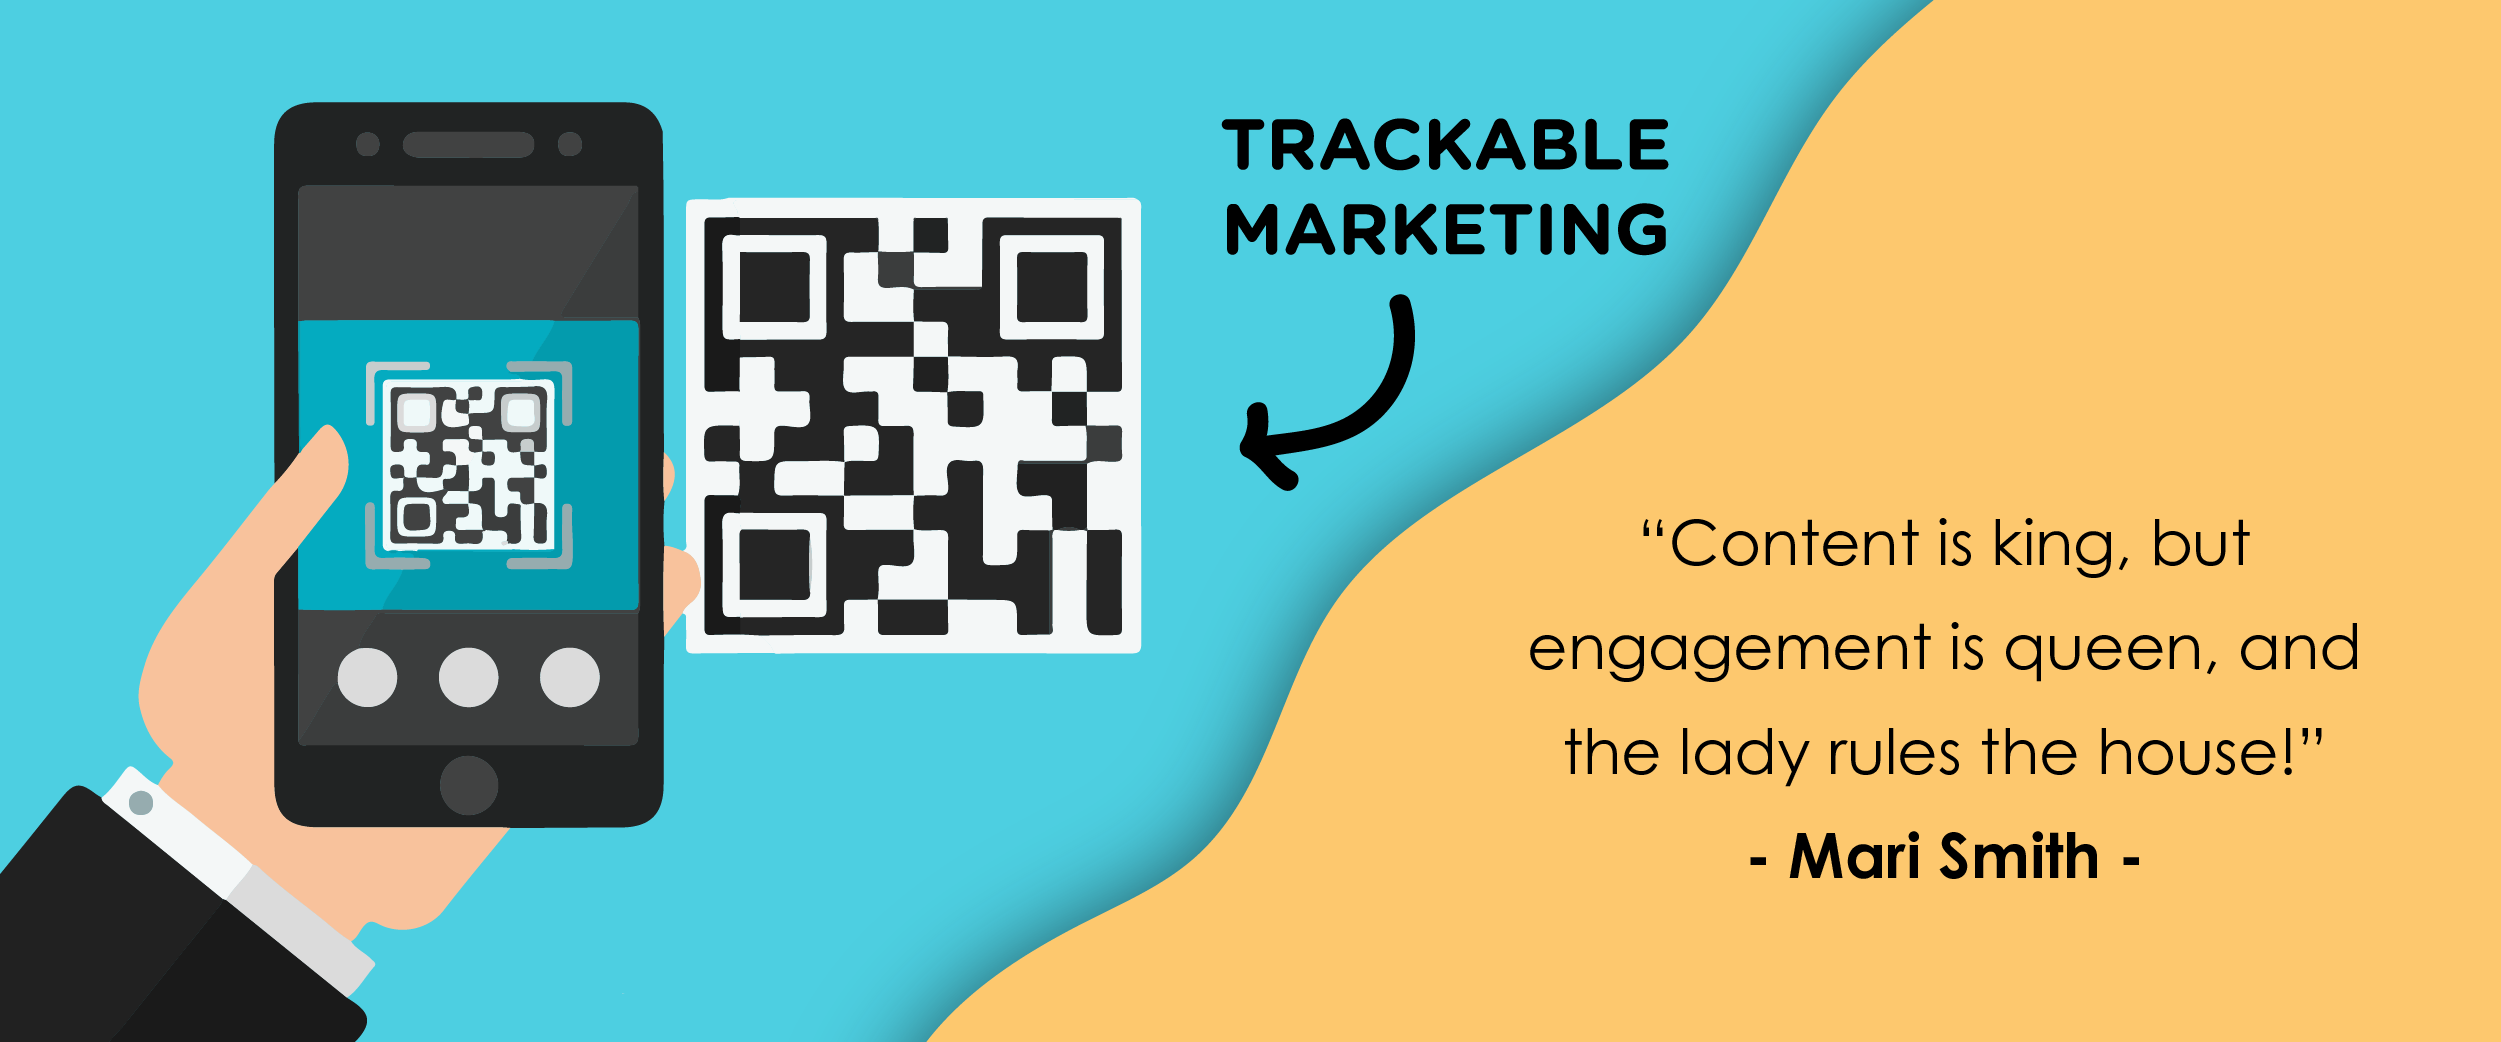 trackable marketing graphic